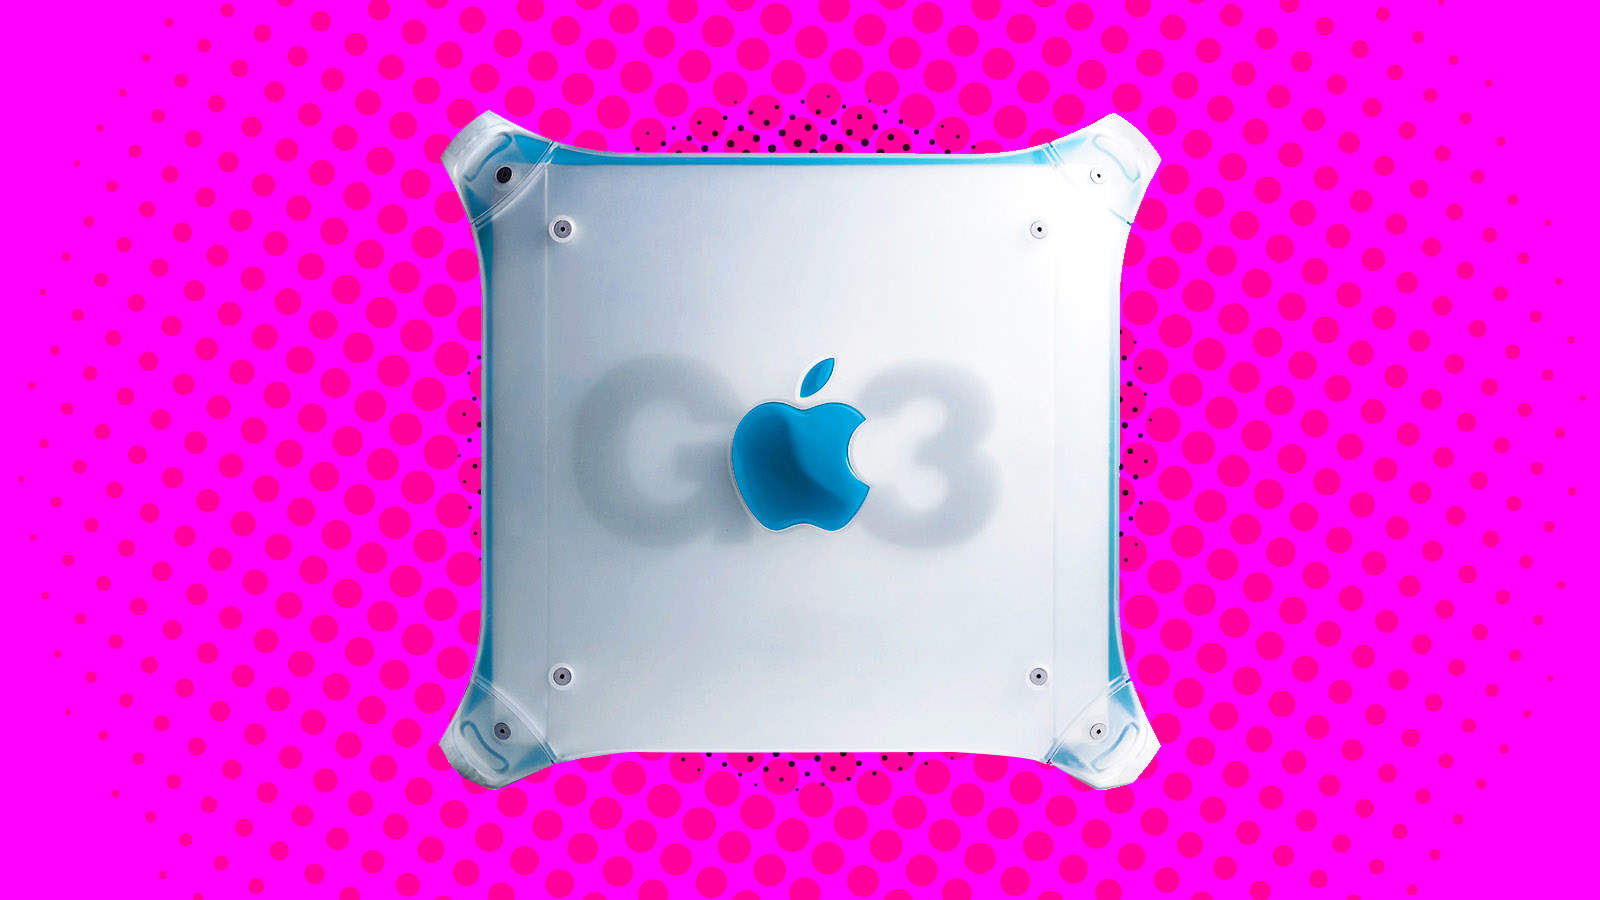 The Power Mac G3 brought a new look, and powerful new features, to Apple's pro computer line.